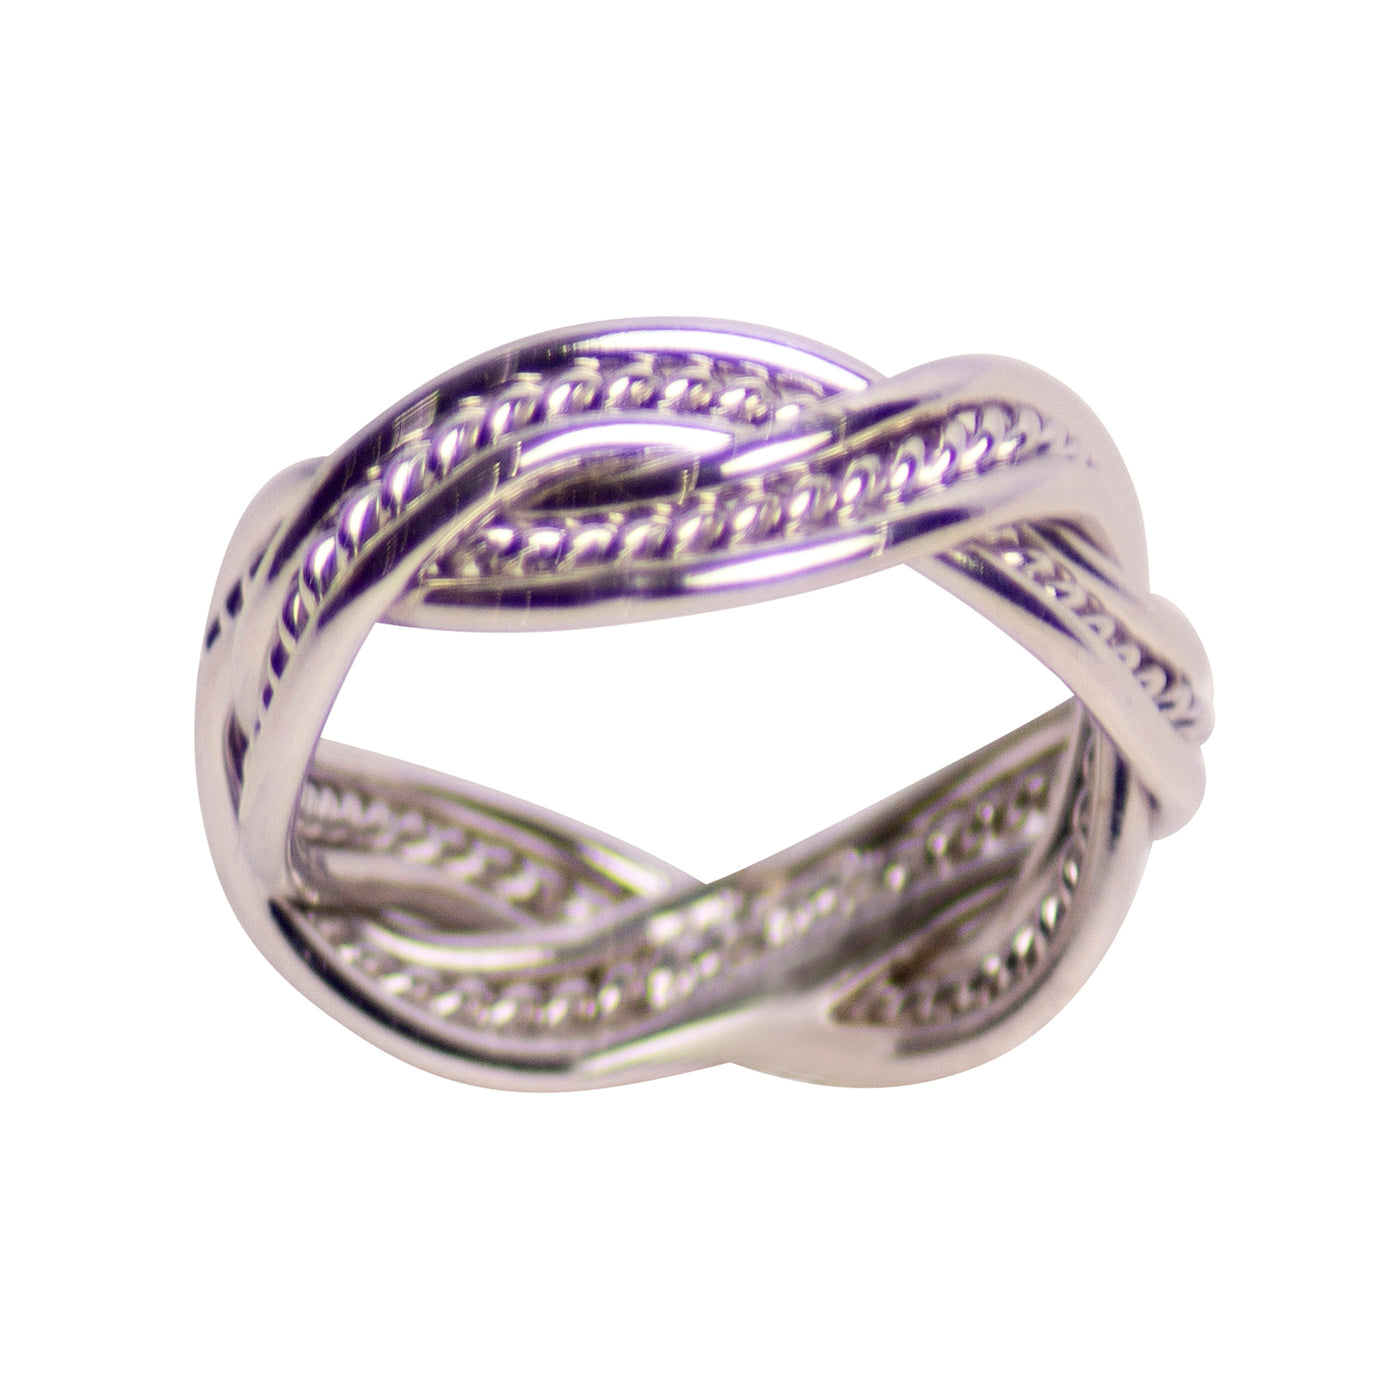 Silver Double Twist Ring